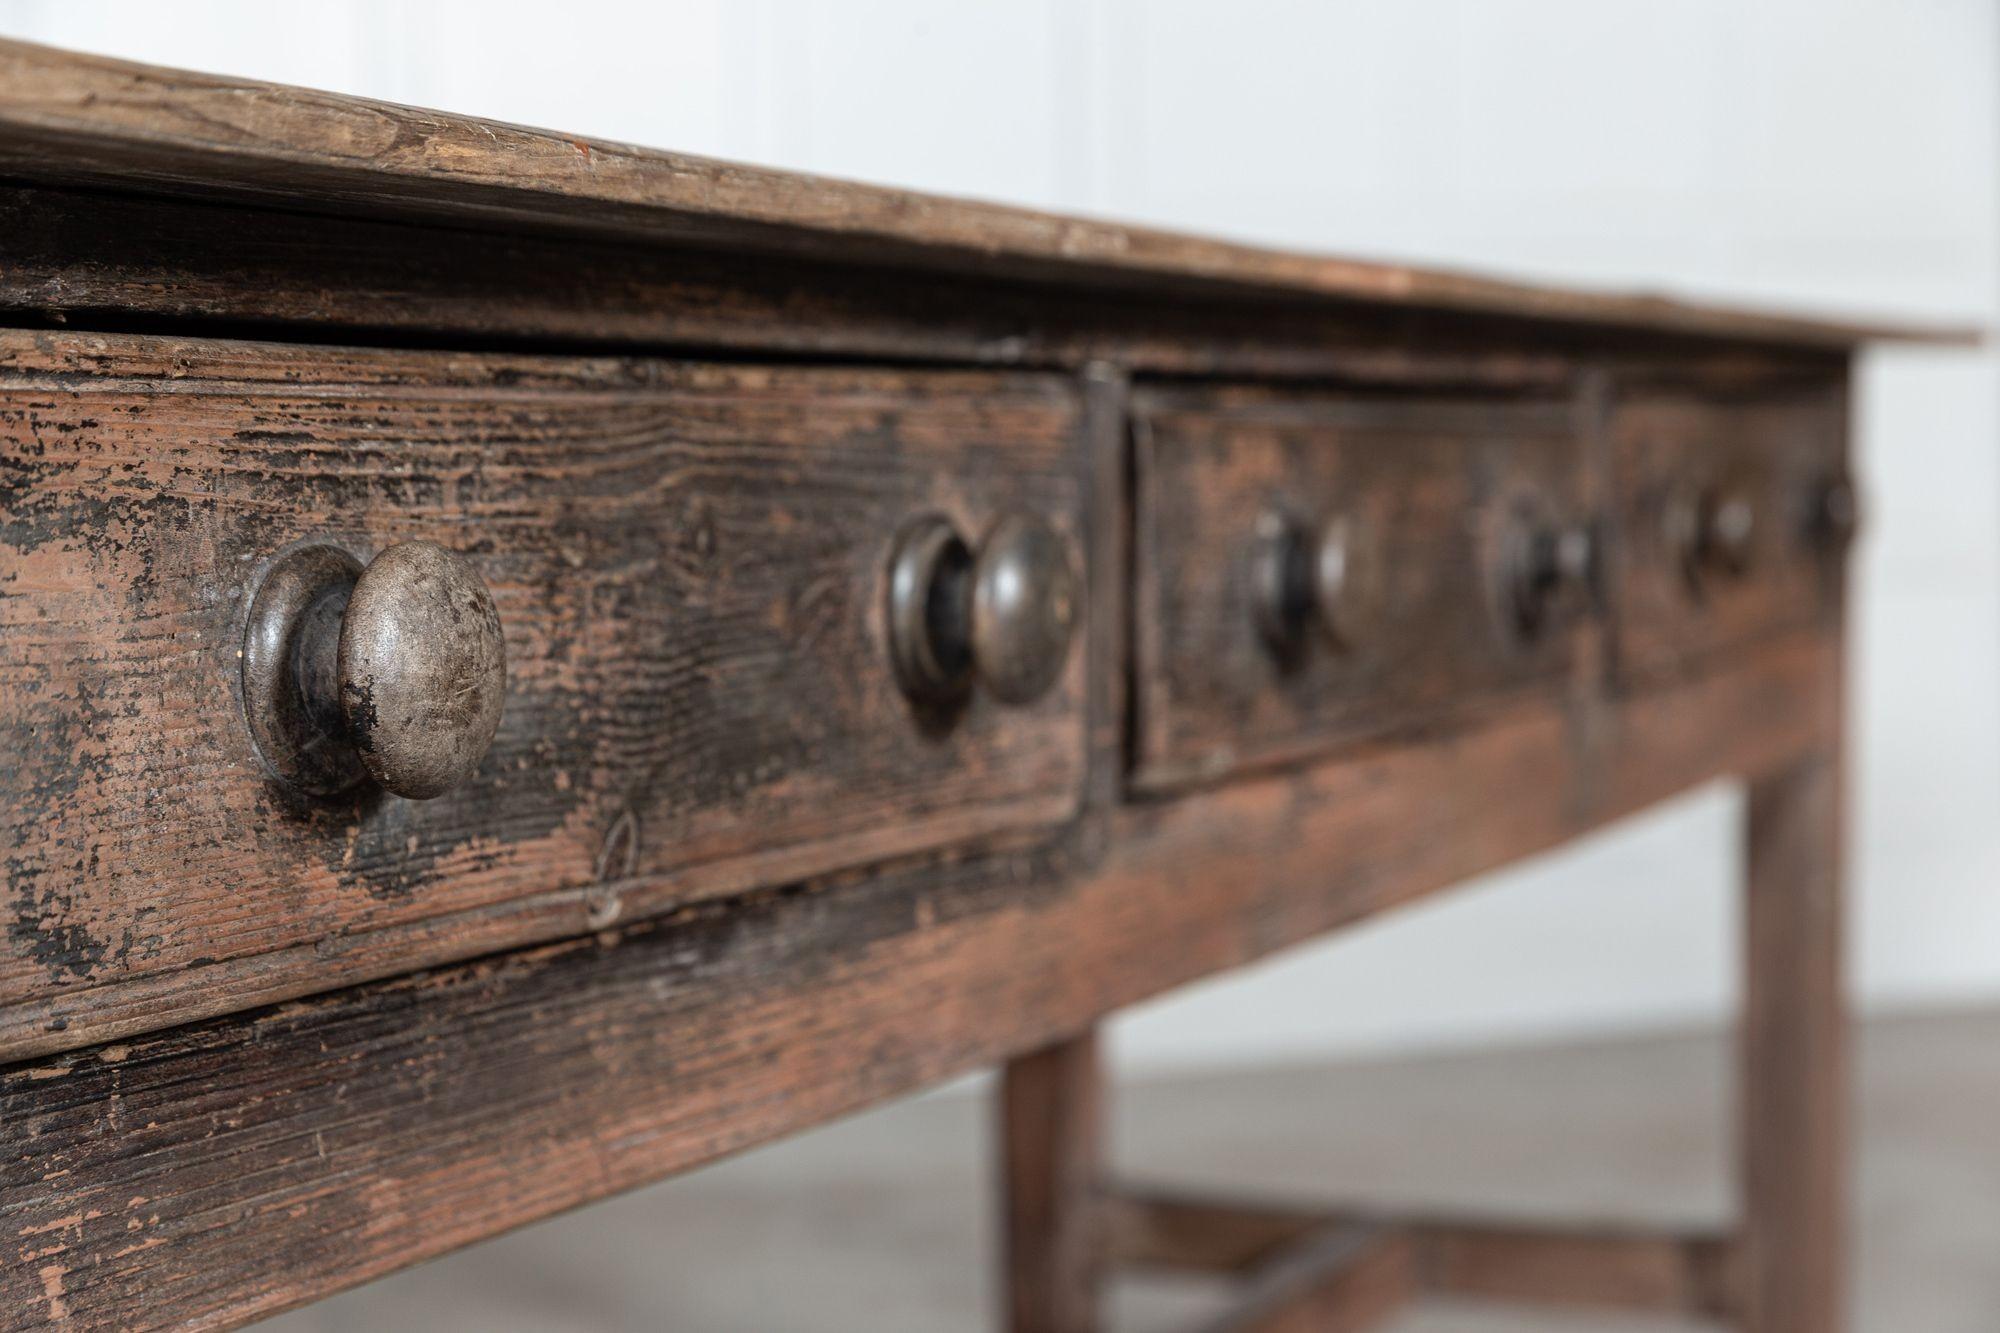 circa 1820
Georgian Welsh 2 plank pine scullery prep table
Lovely form and scale with traces of its historic paint.
Measures: W 202 x D 70 x H 78 cm.
   